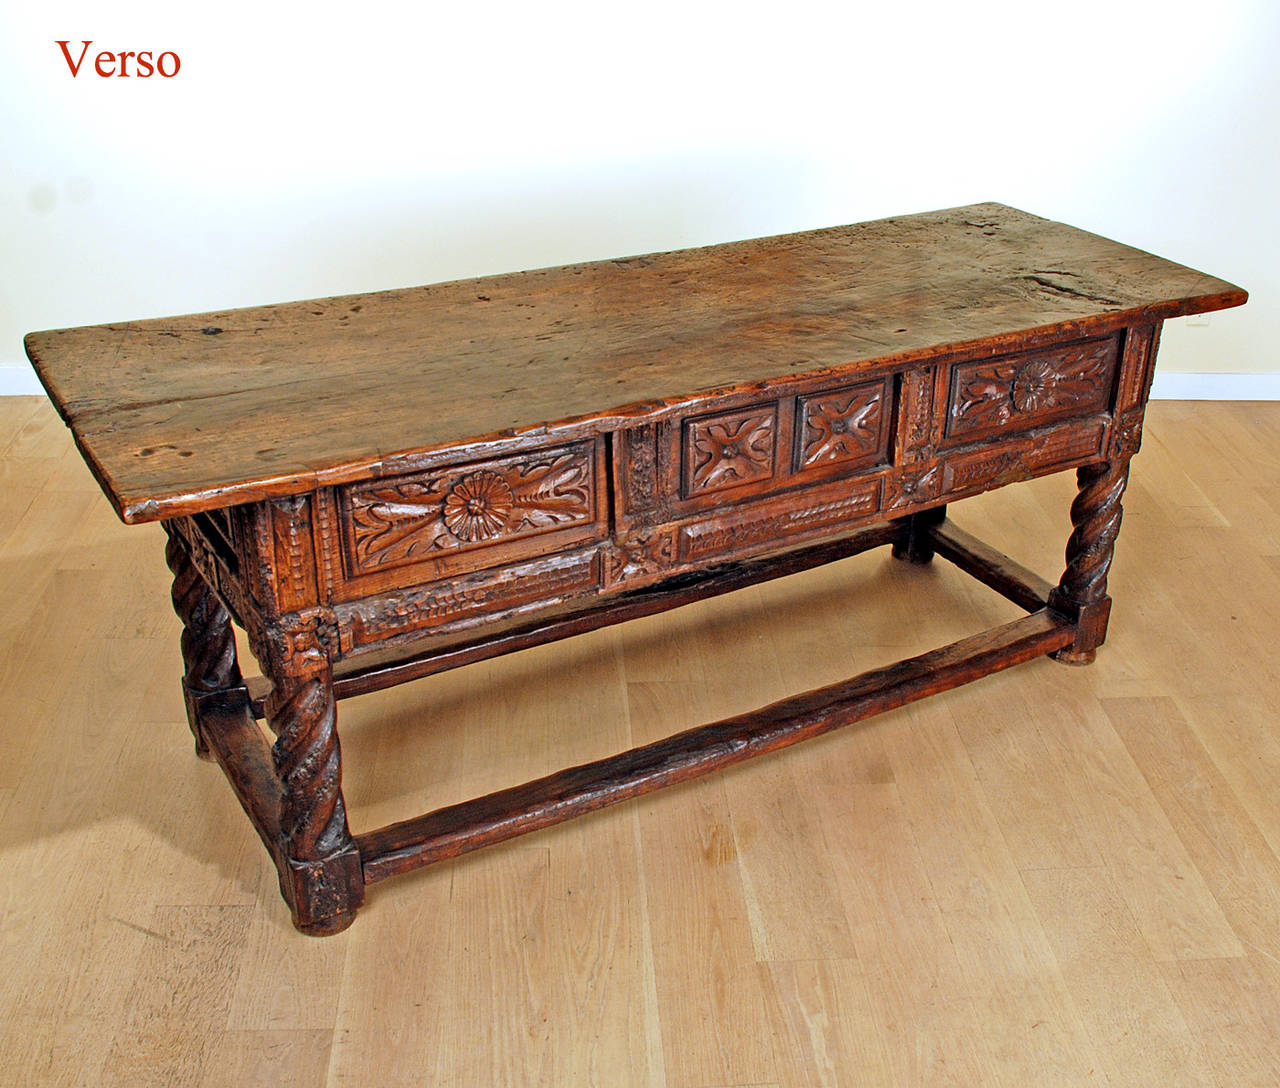 Superb 17th Century Spanish Baroque Period Chestnut Desk In Excellent Condition For Sale In San Francisco, CA